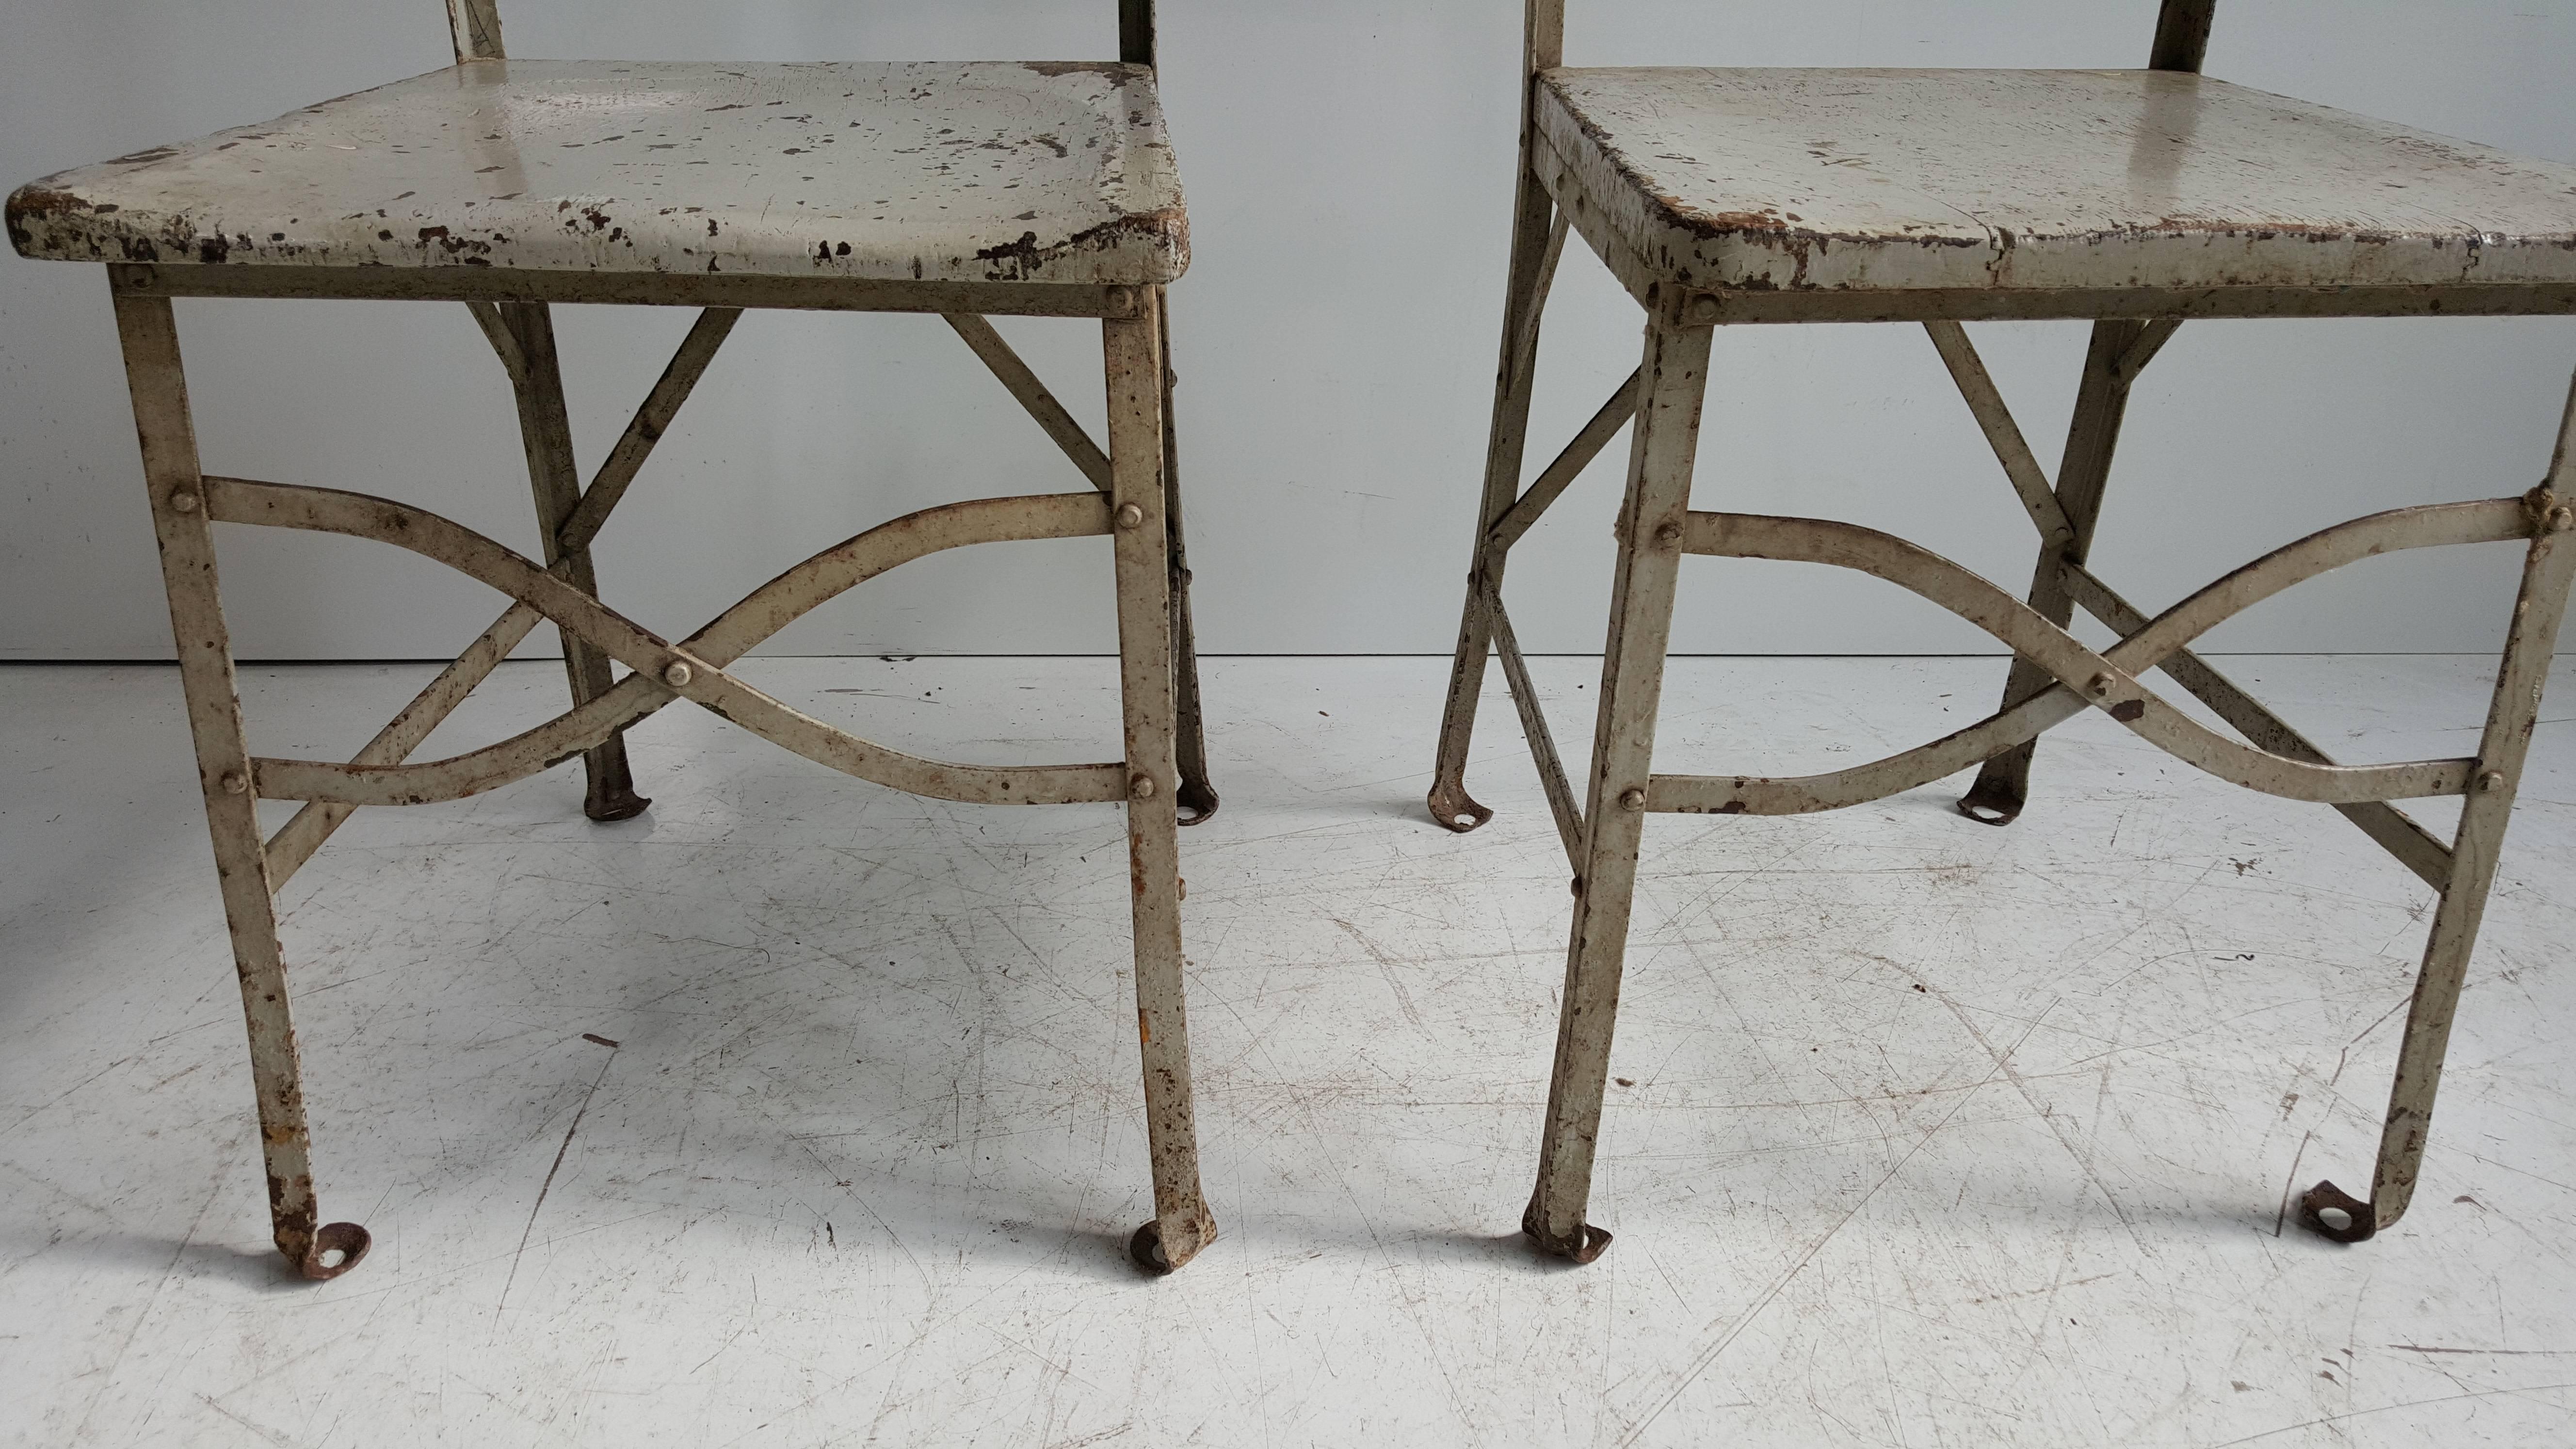 Painted Pair of American Modernist Industrial Chairs, Old Factory Grey Paint, Toledo